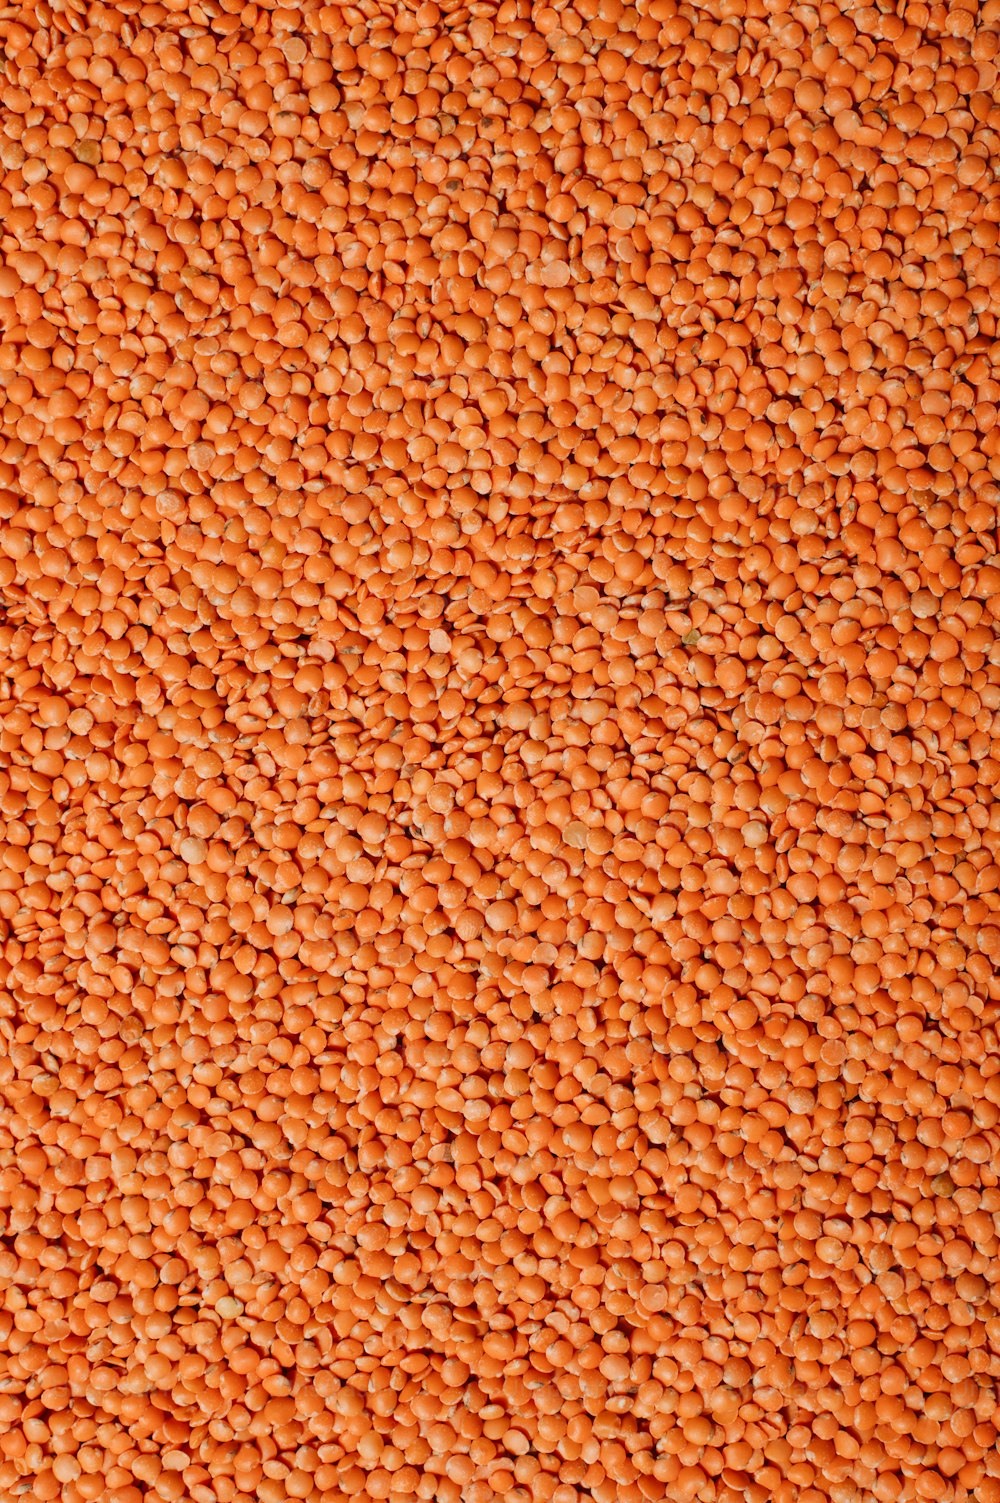 a large pile of grains